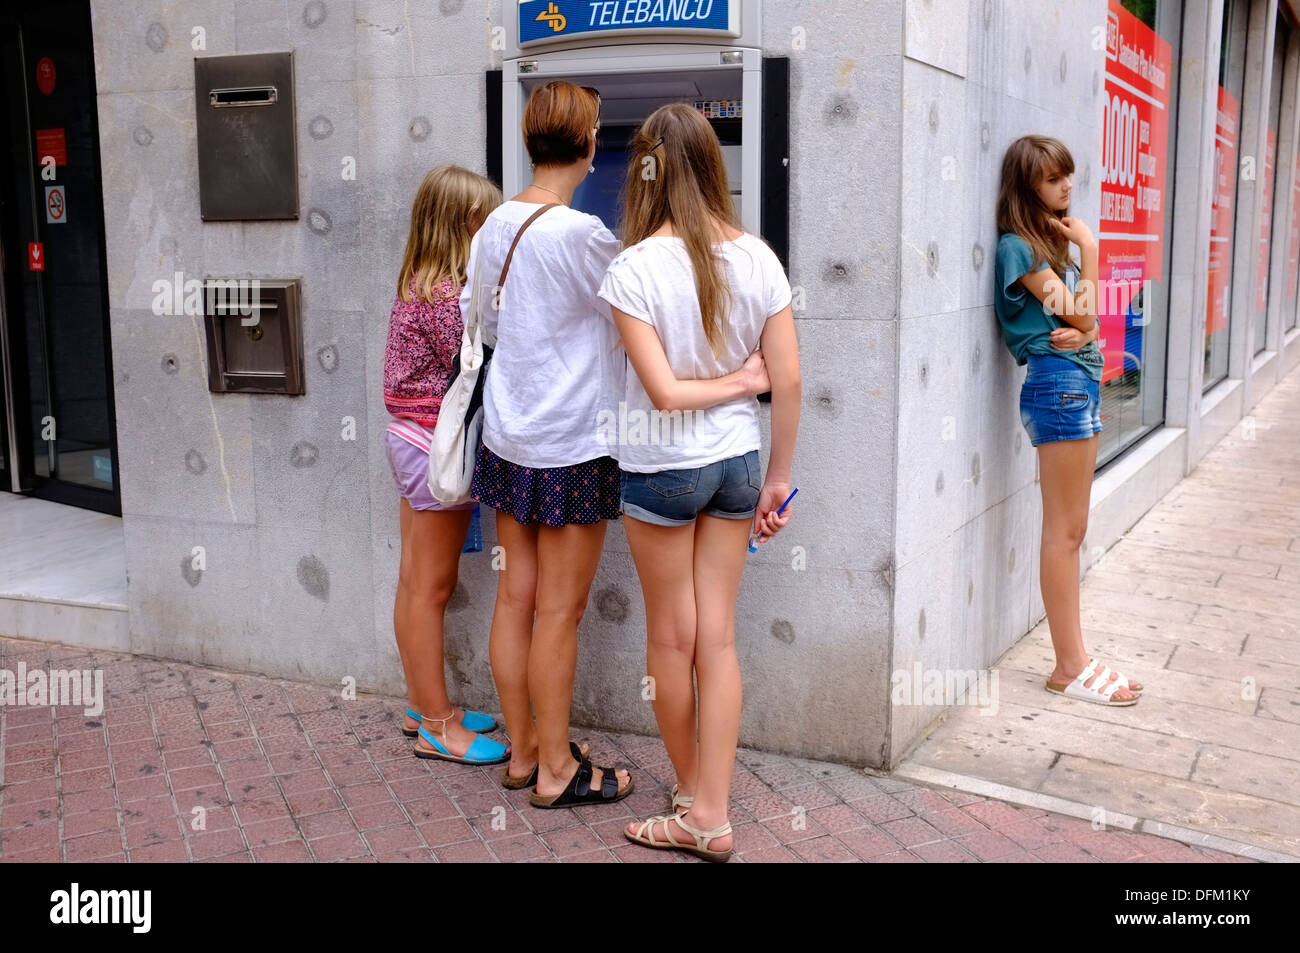 Mother at cashpoint with daughters, Majorca, Balearic Islands Stock Photo